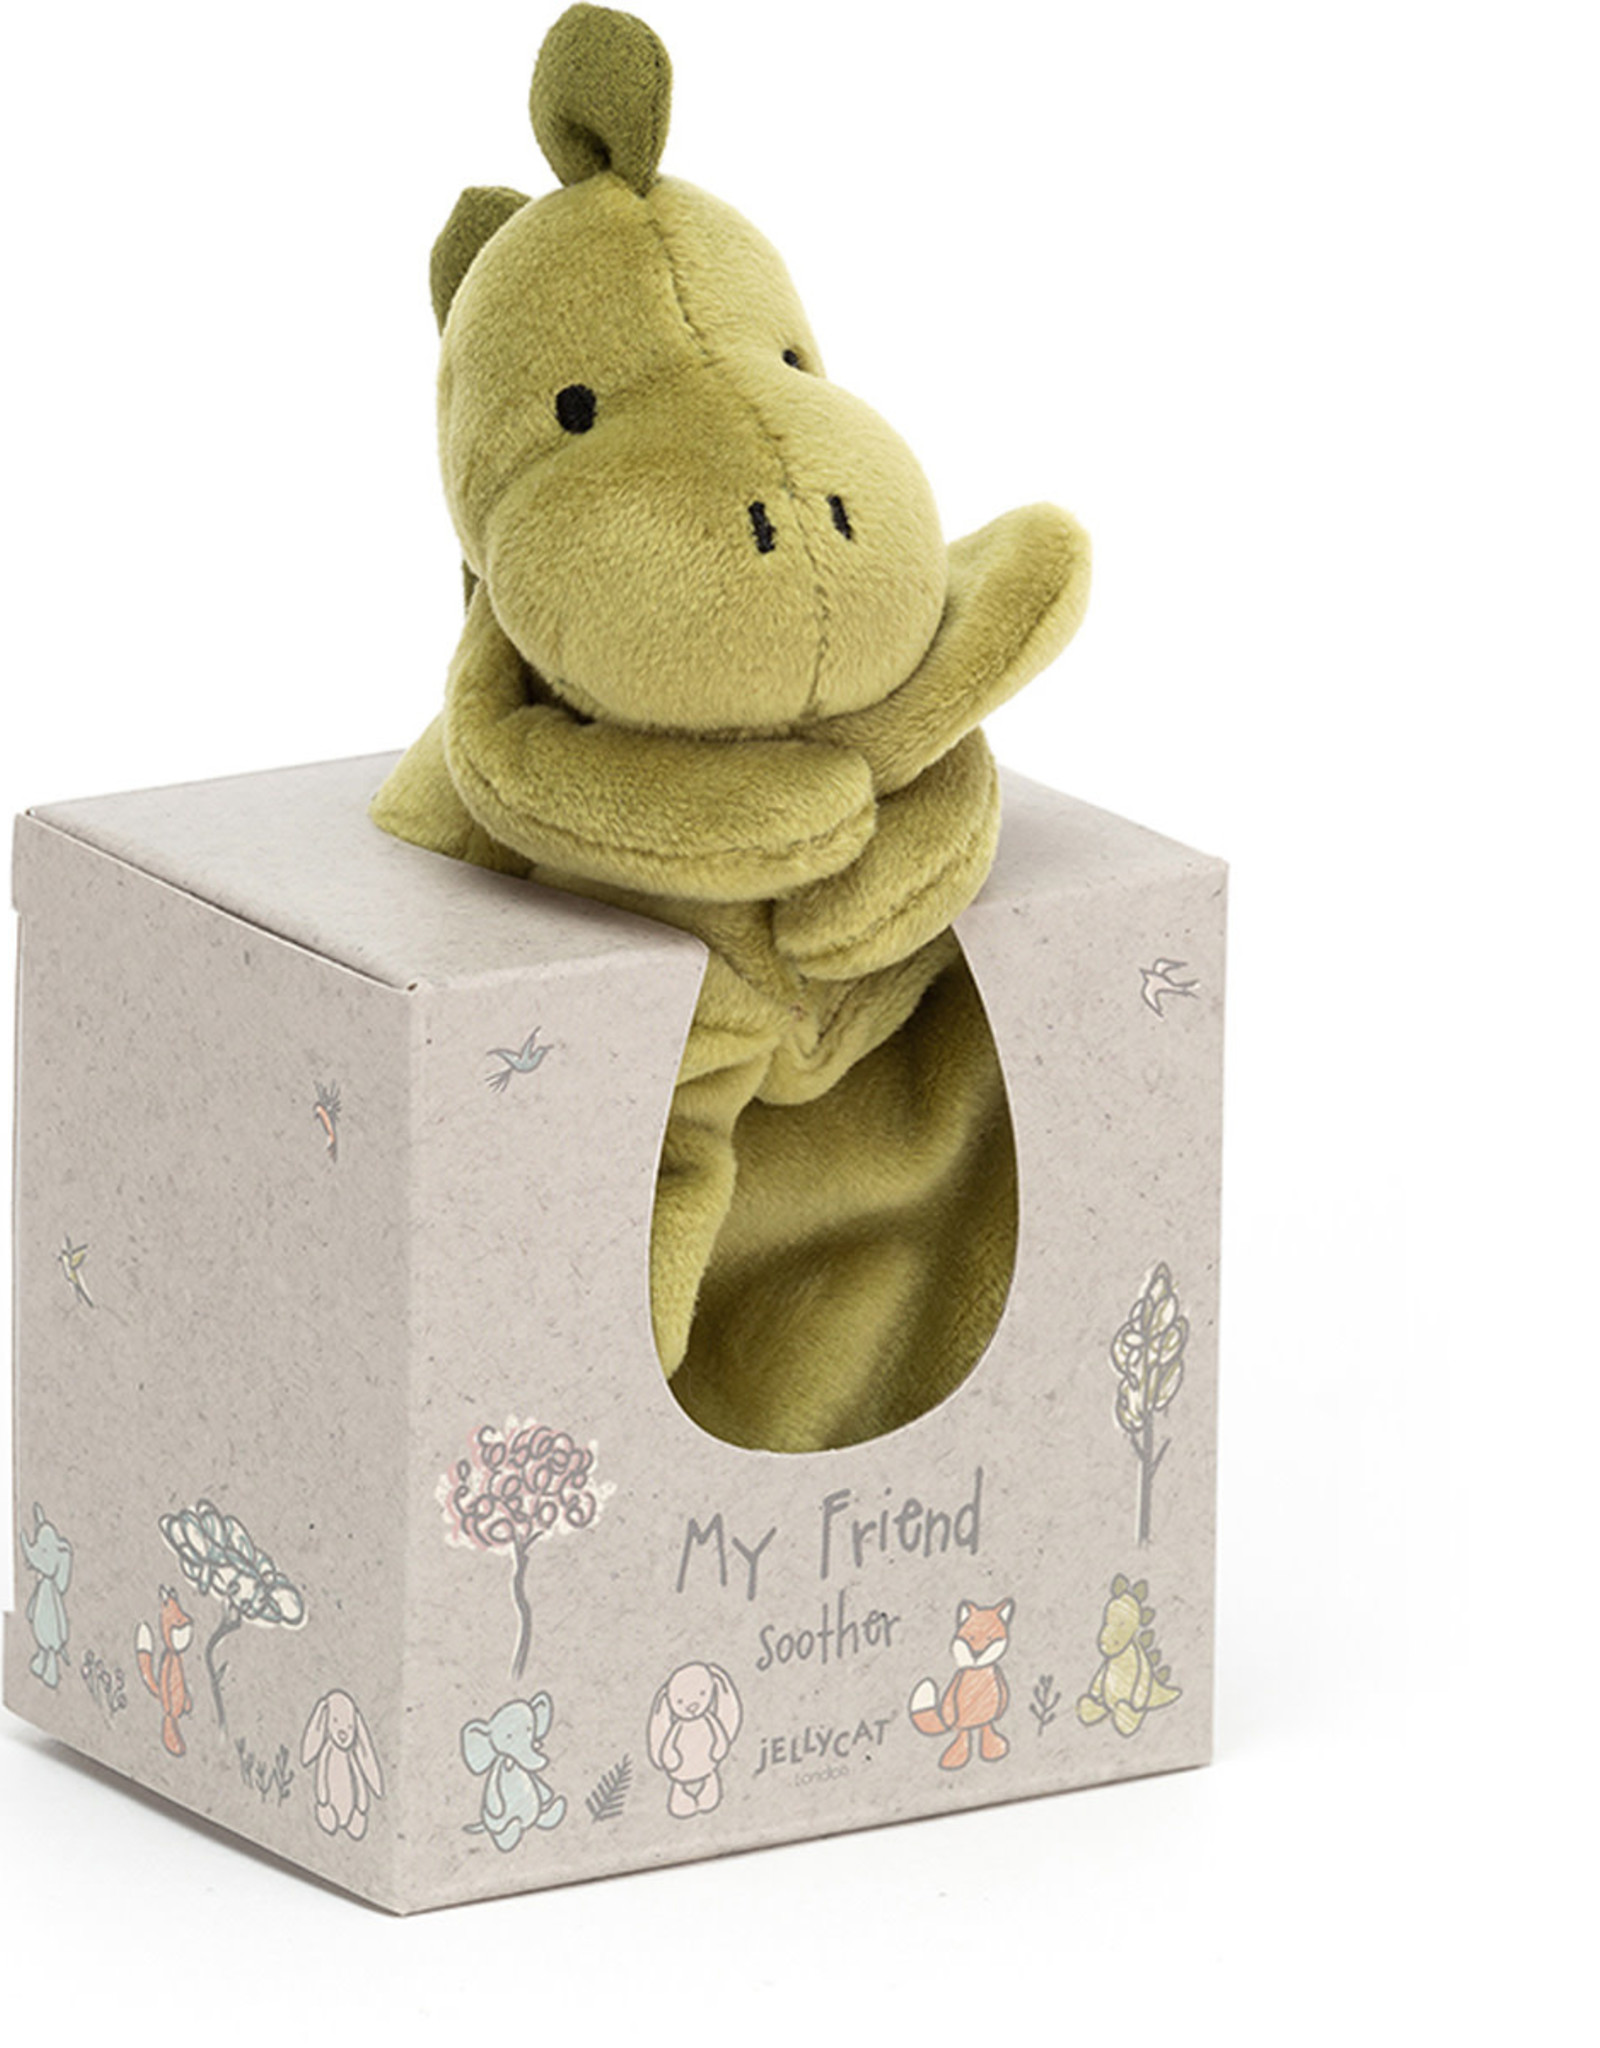 JellyCat Jellycat My Friend Dino Soother